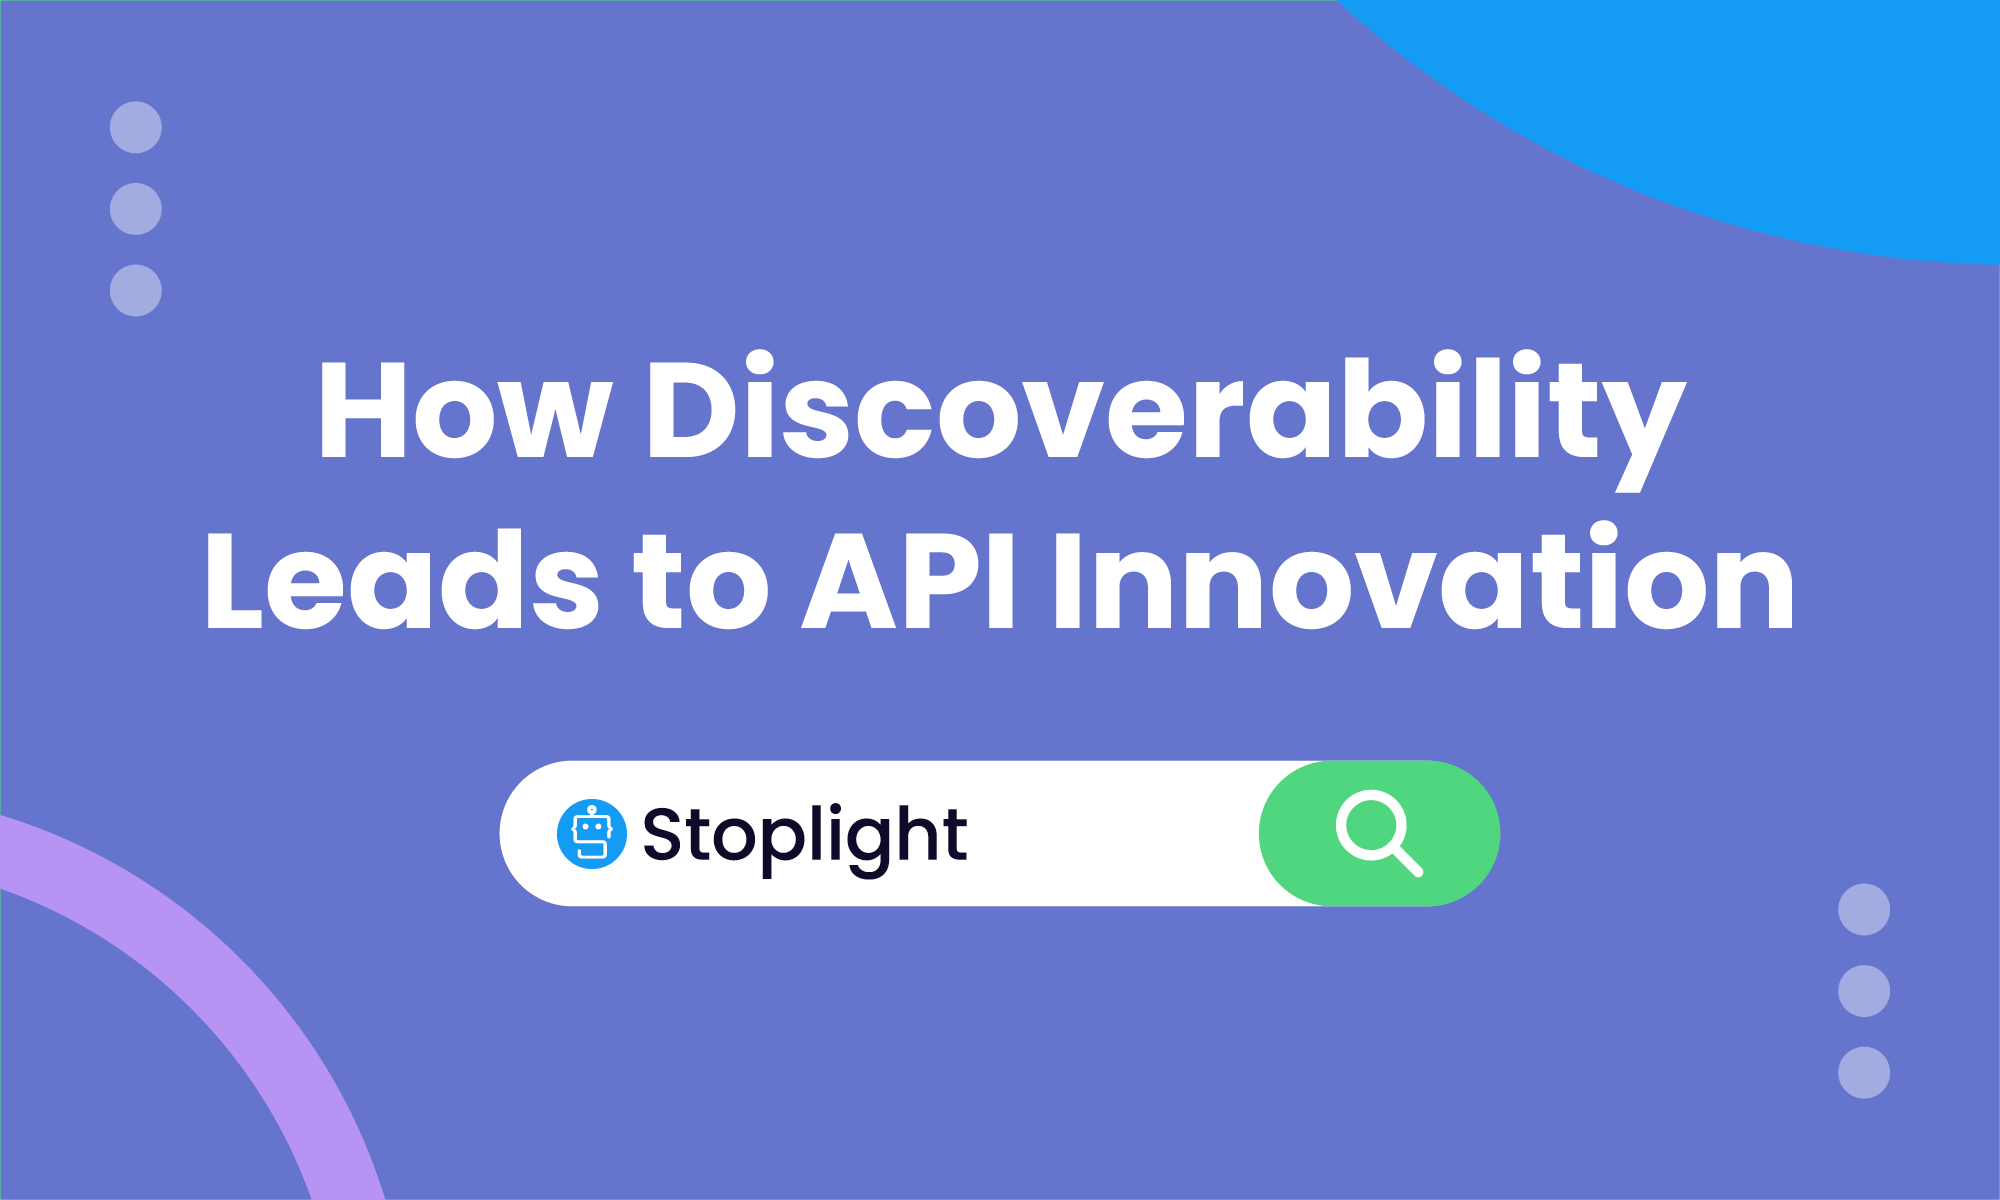 How Discoverability Leads to API Innovation